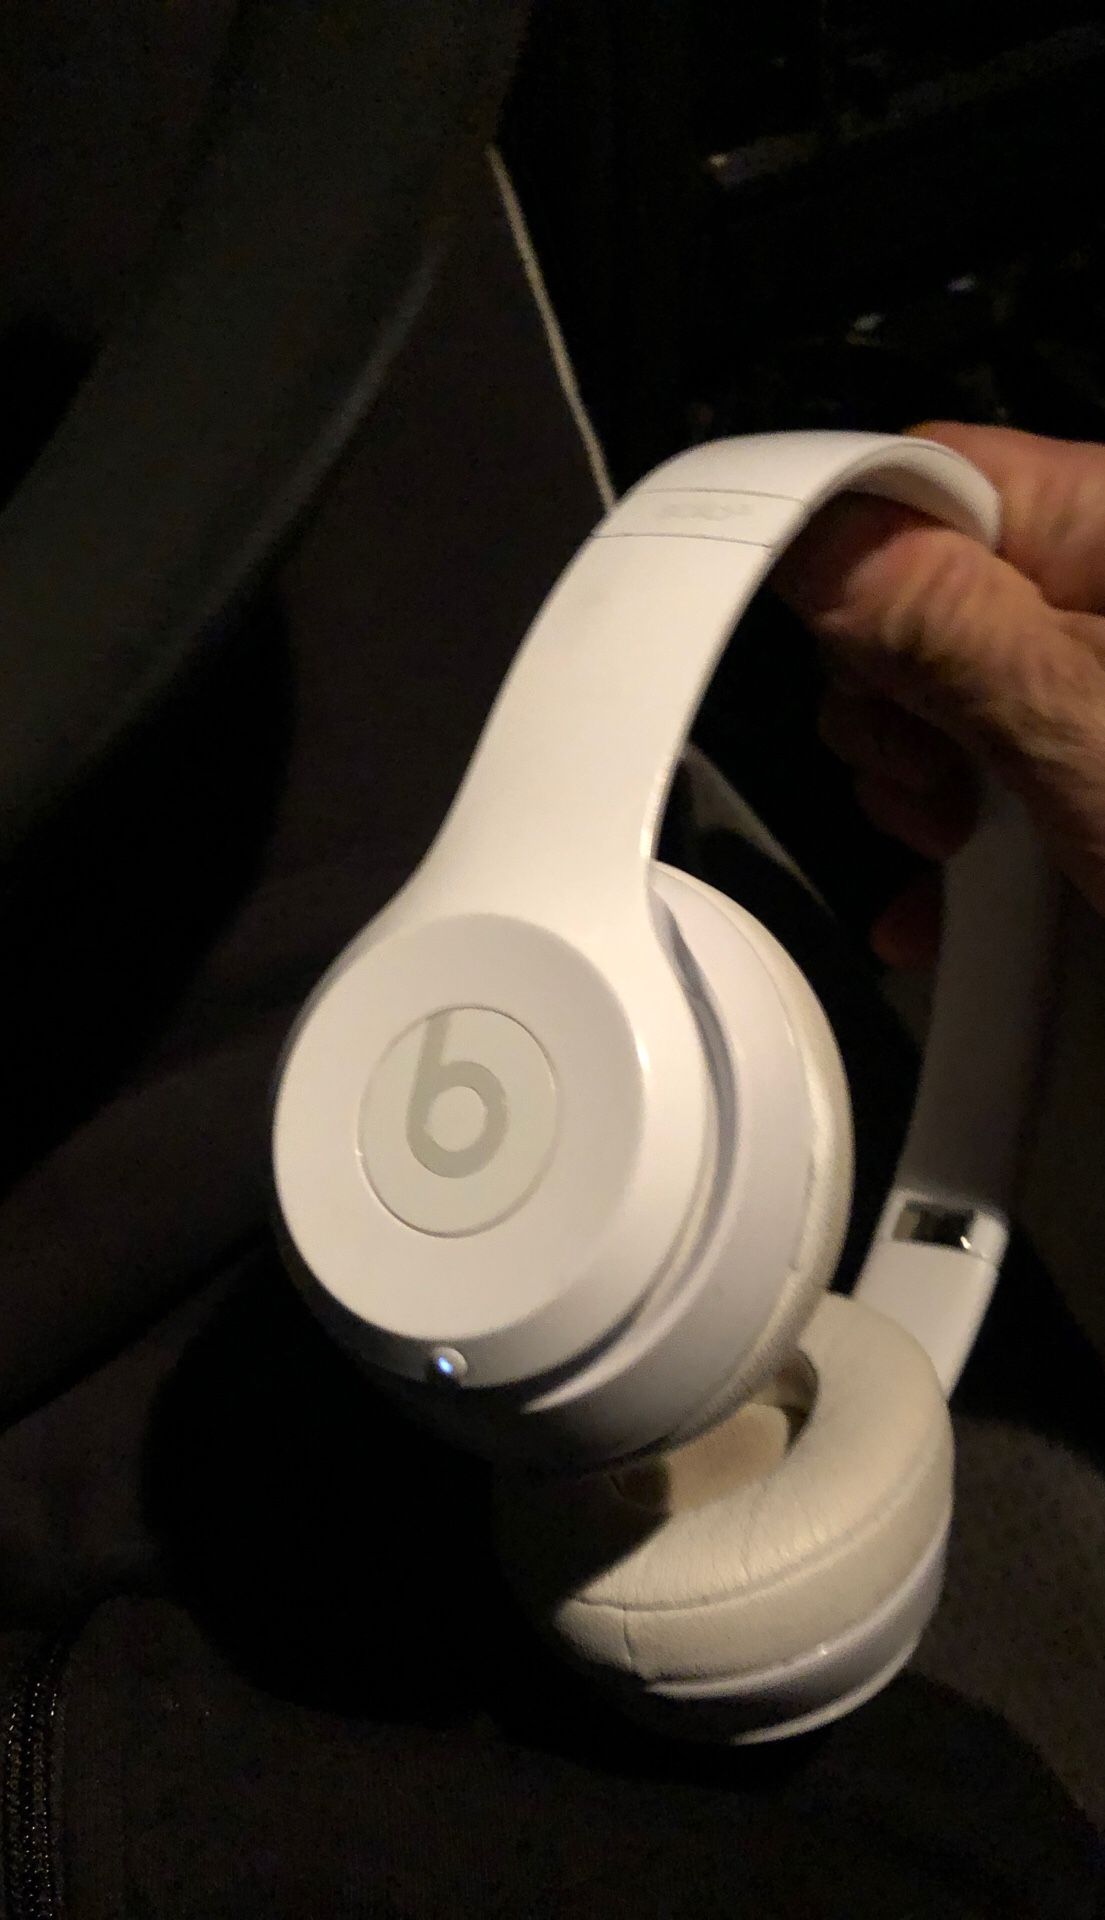 beats solo 3 , trade for airpods ?